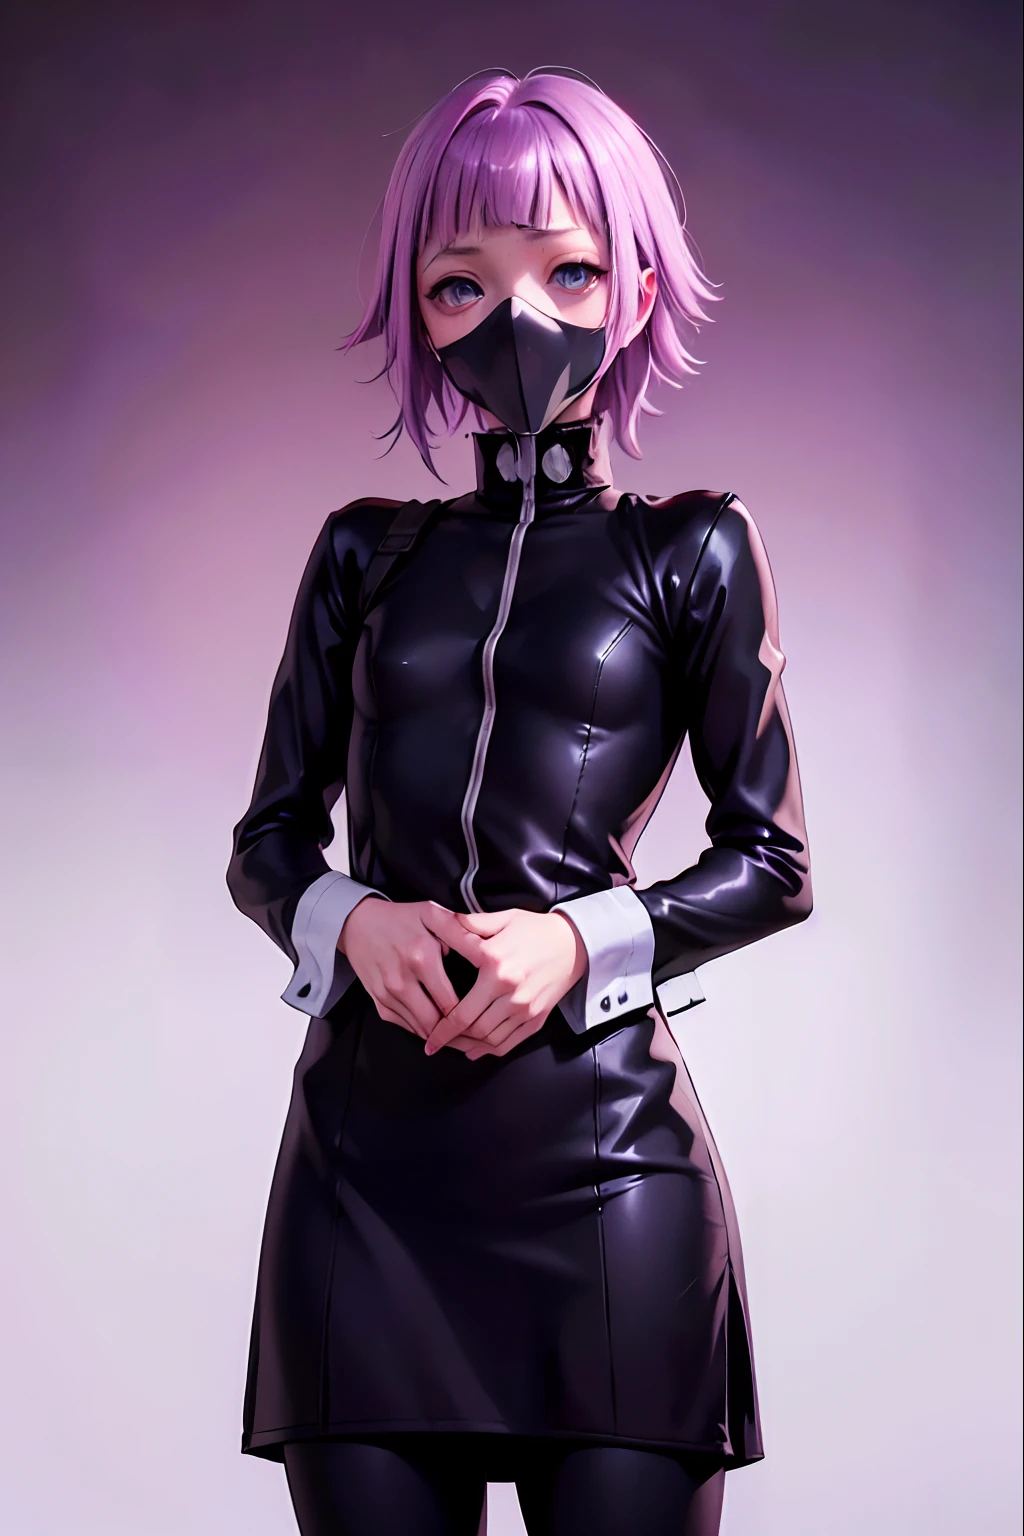 That he has a military uniform fights you and I have a gas mask that his eyes and his face come out well formed that I have a military combat suit that looks full body Crona only appears one person has purple hair that only appears Crona that the image appears well the eyes come out well